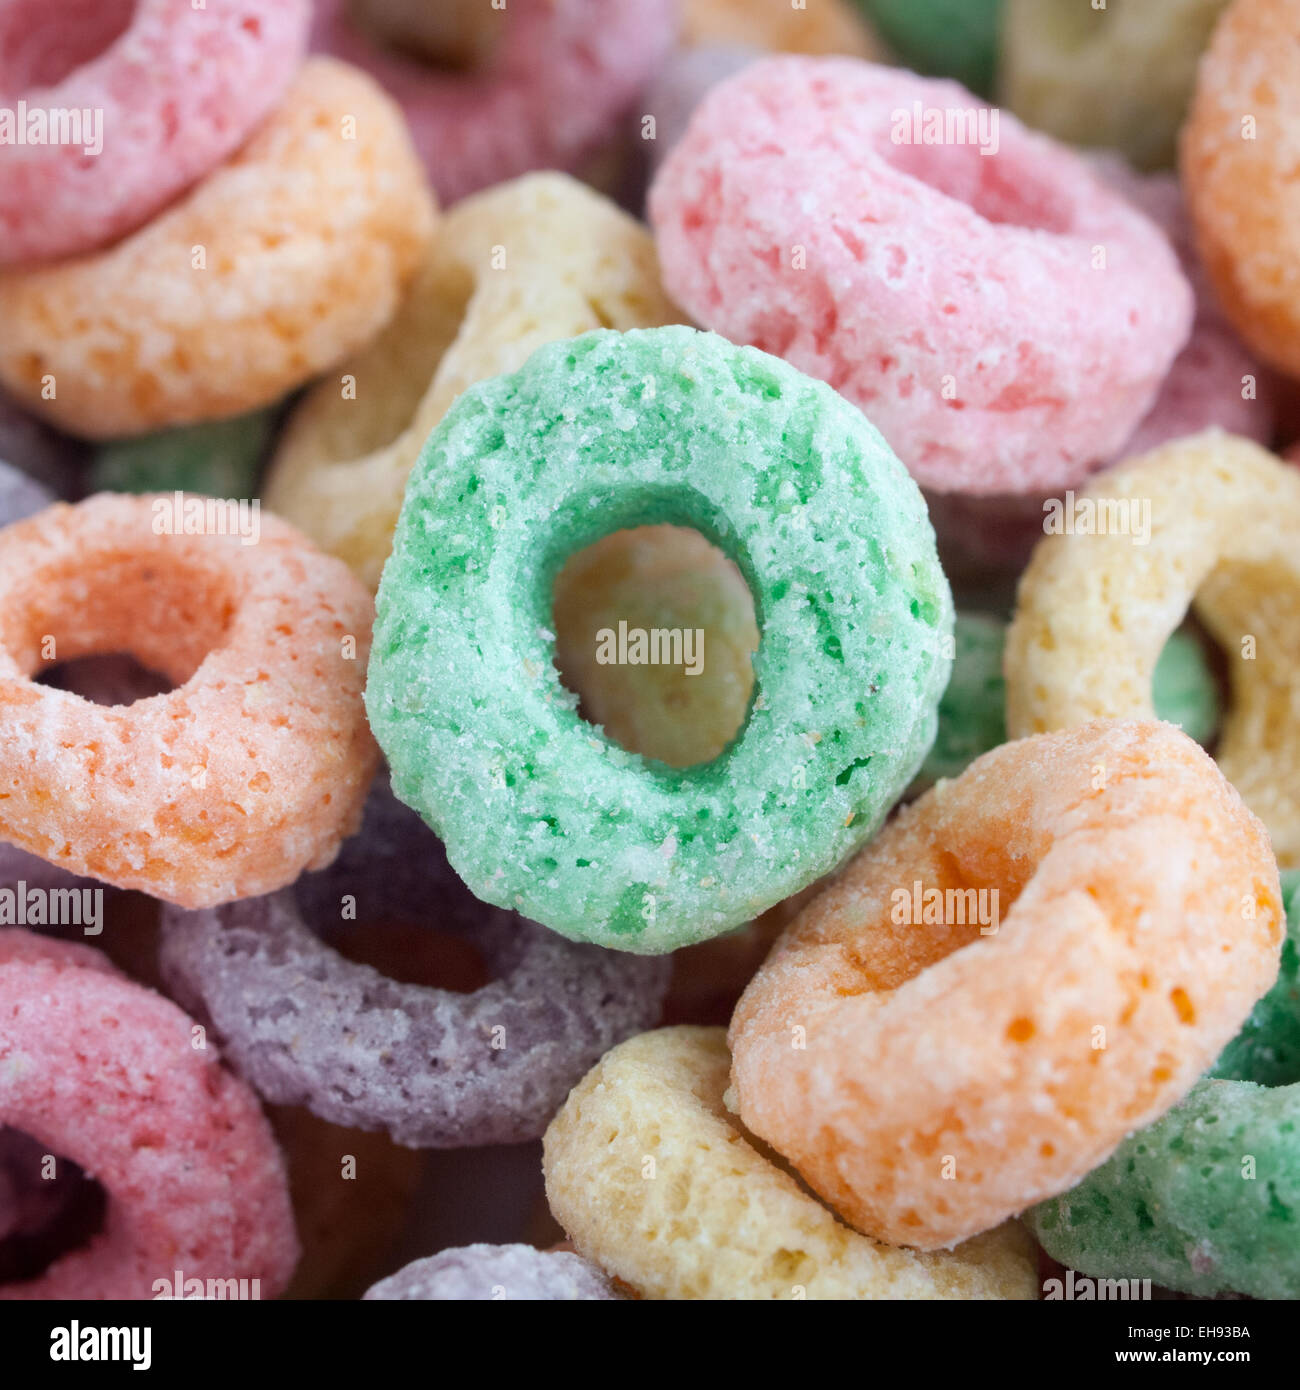 A close-up of Kellogg's Froot Loops cereal. Canadian version of